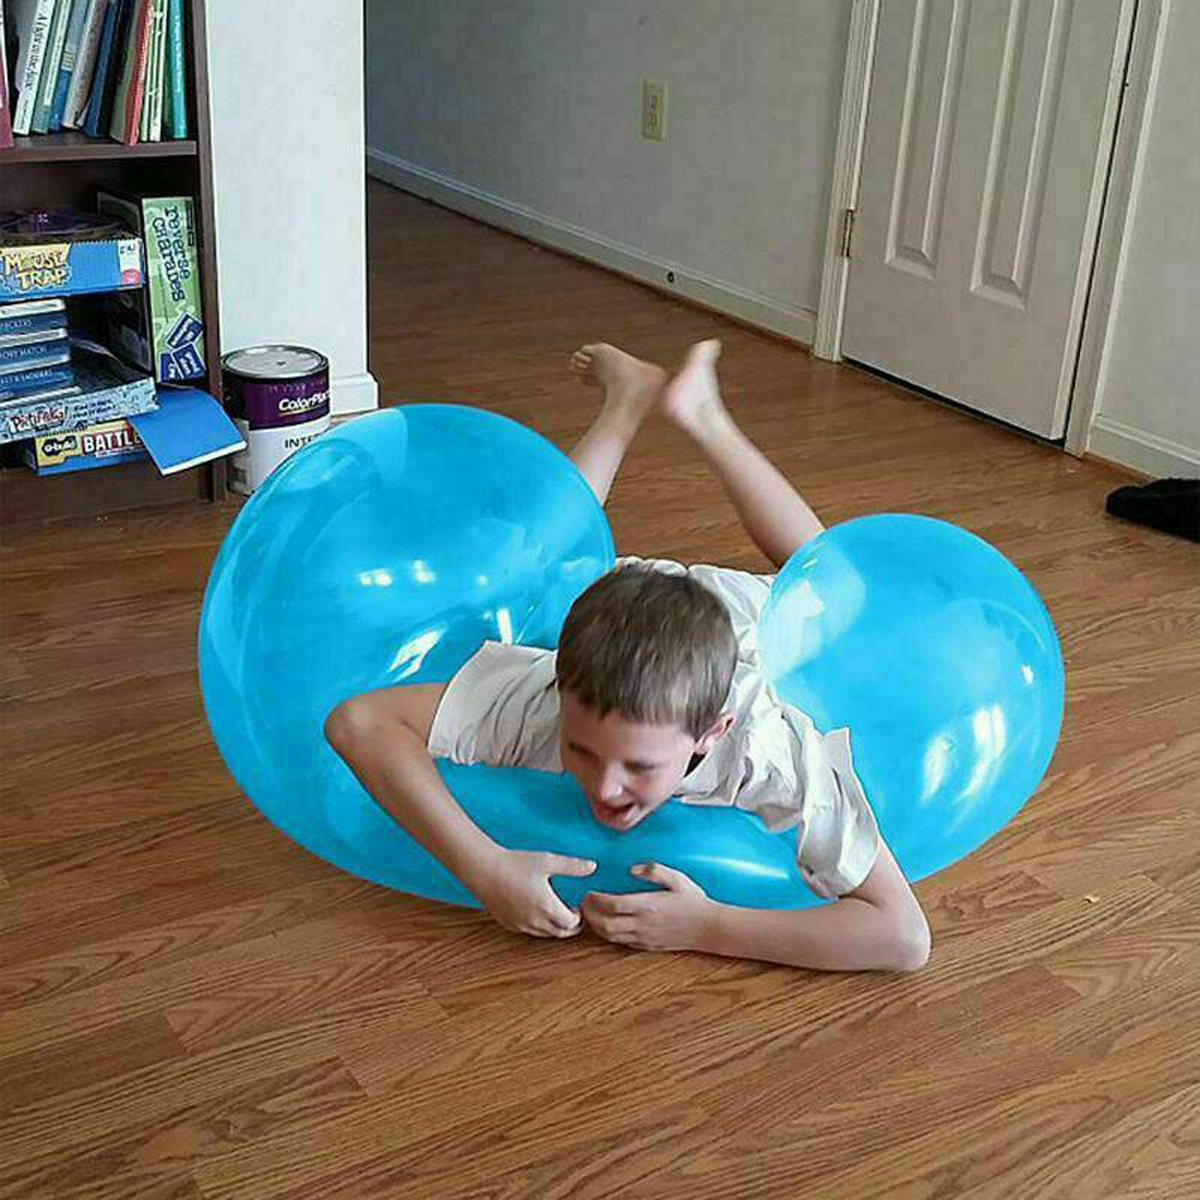 120CM-Multi-color-Bubble-Ball-Inflatable-Filling-Water-Giant-Ball-Toys-for-Kids-Play-Gift-1891654-4